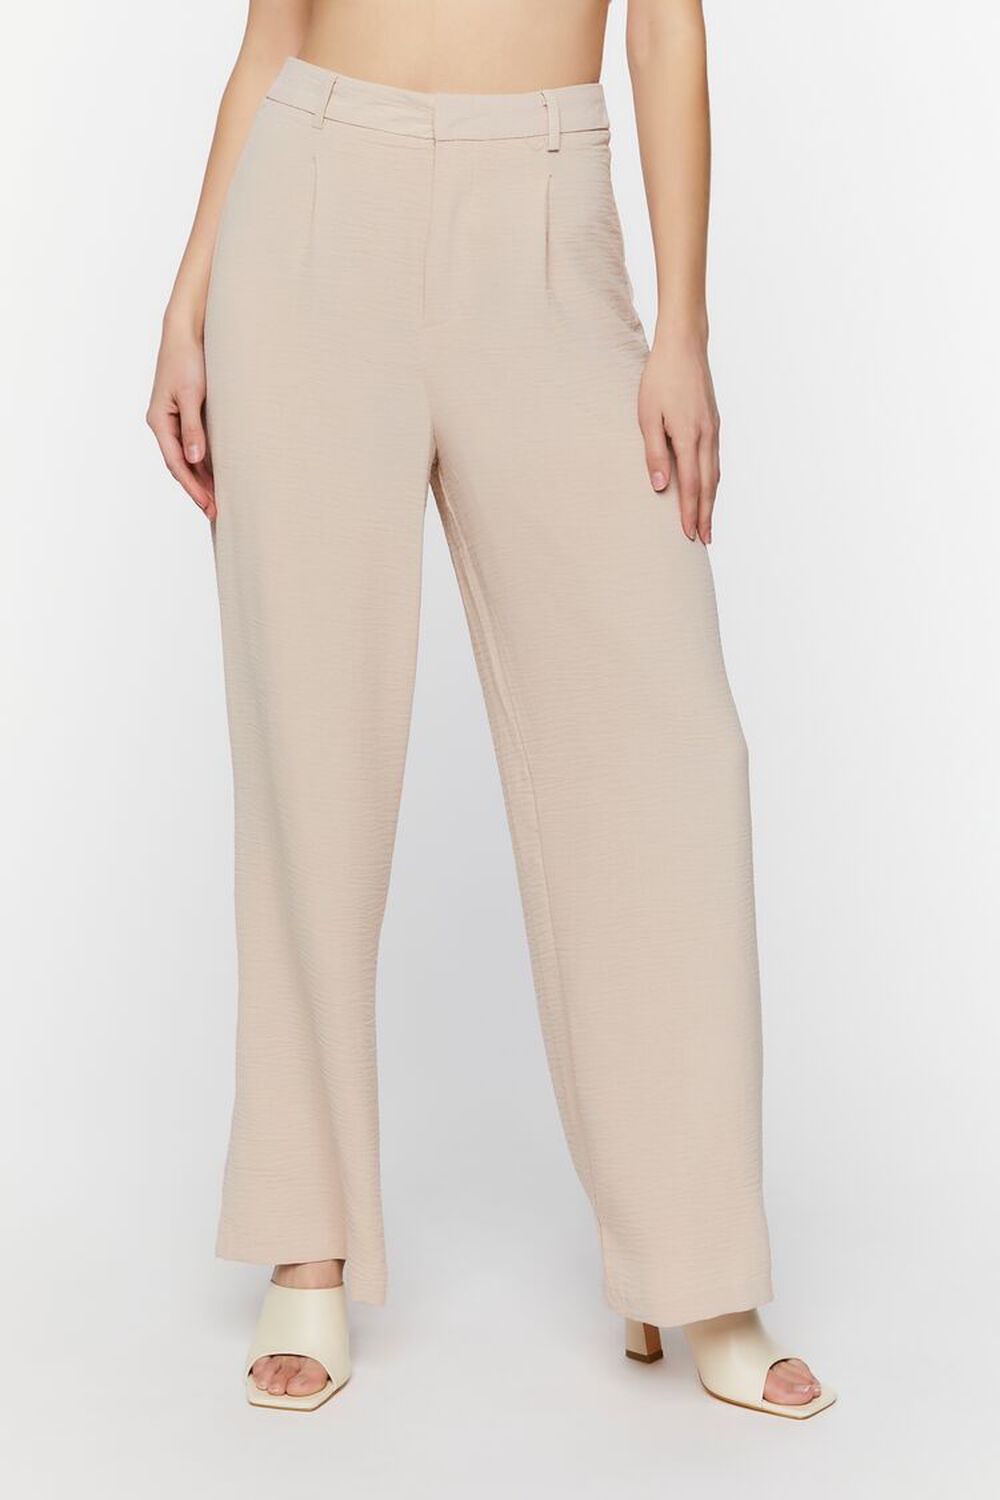 TAUPE Textured High-Rise Trousers, image 2